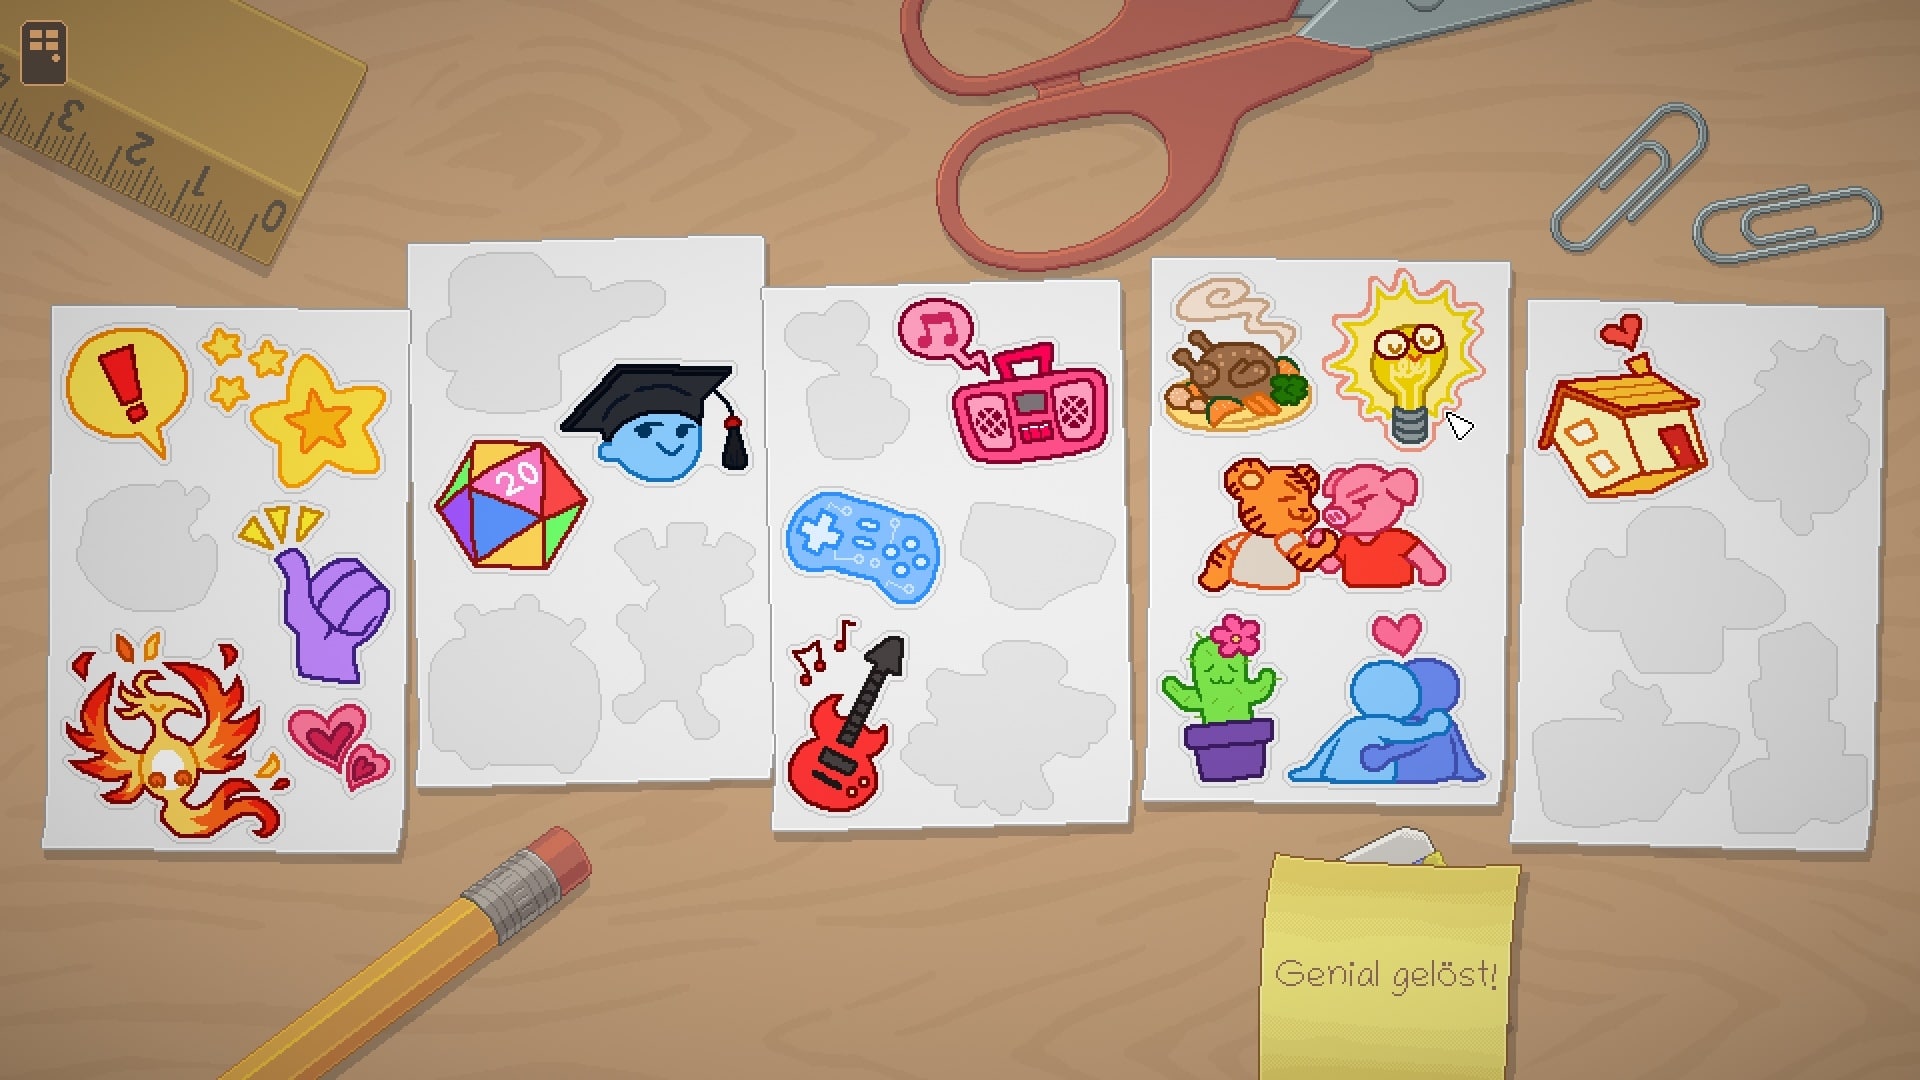 For every level completed and every success achieved, a new sticker ends up in the scrapbook.